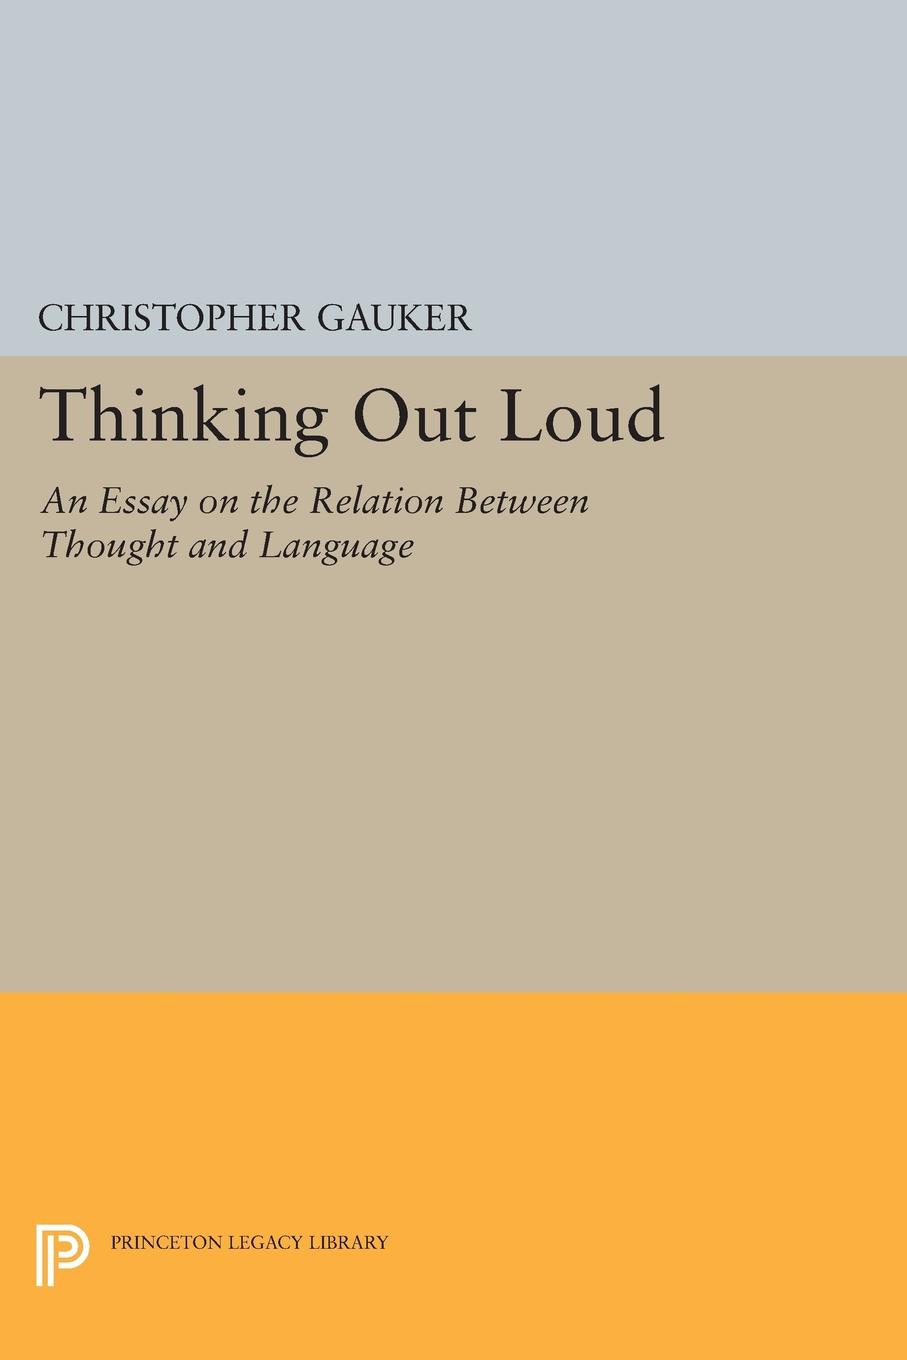 thinking loud meaning